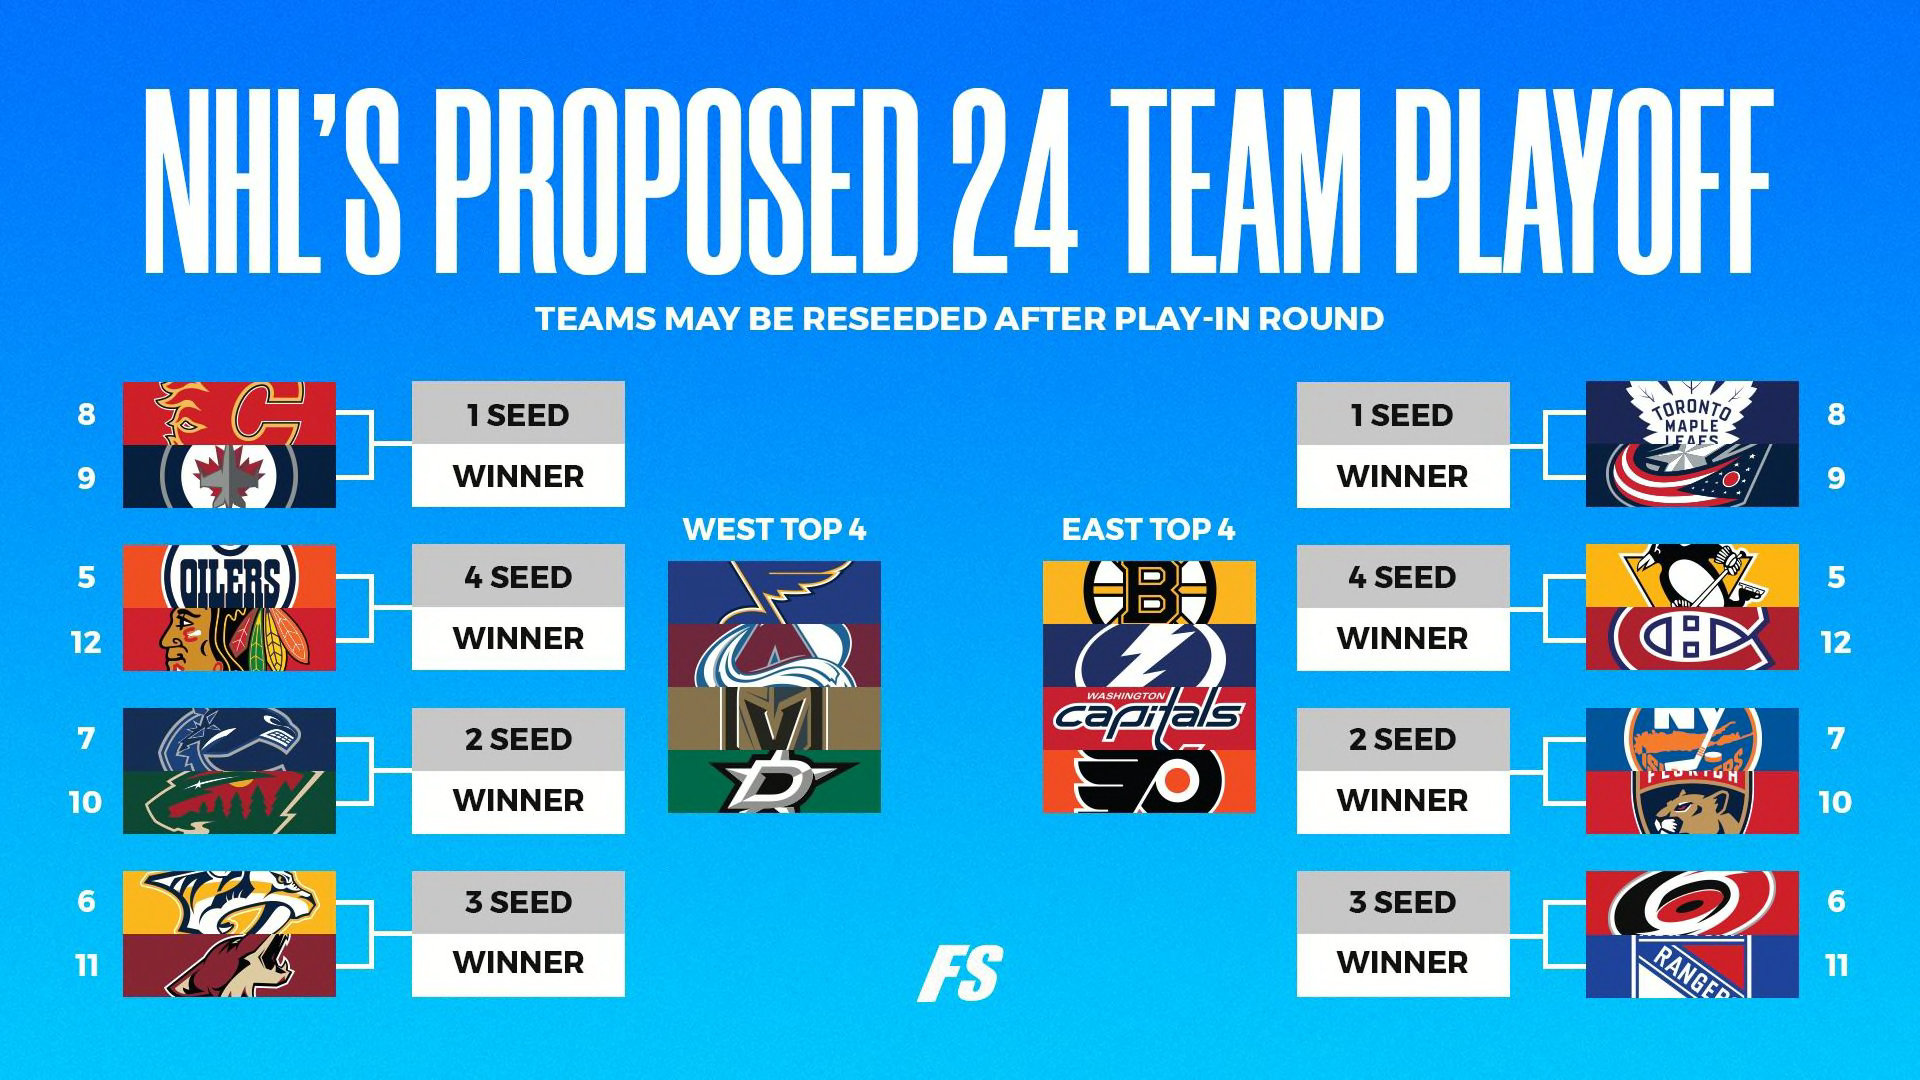 Here Is The 2020 Nhl 24 Team Playoff Bracket For The Leagues Return